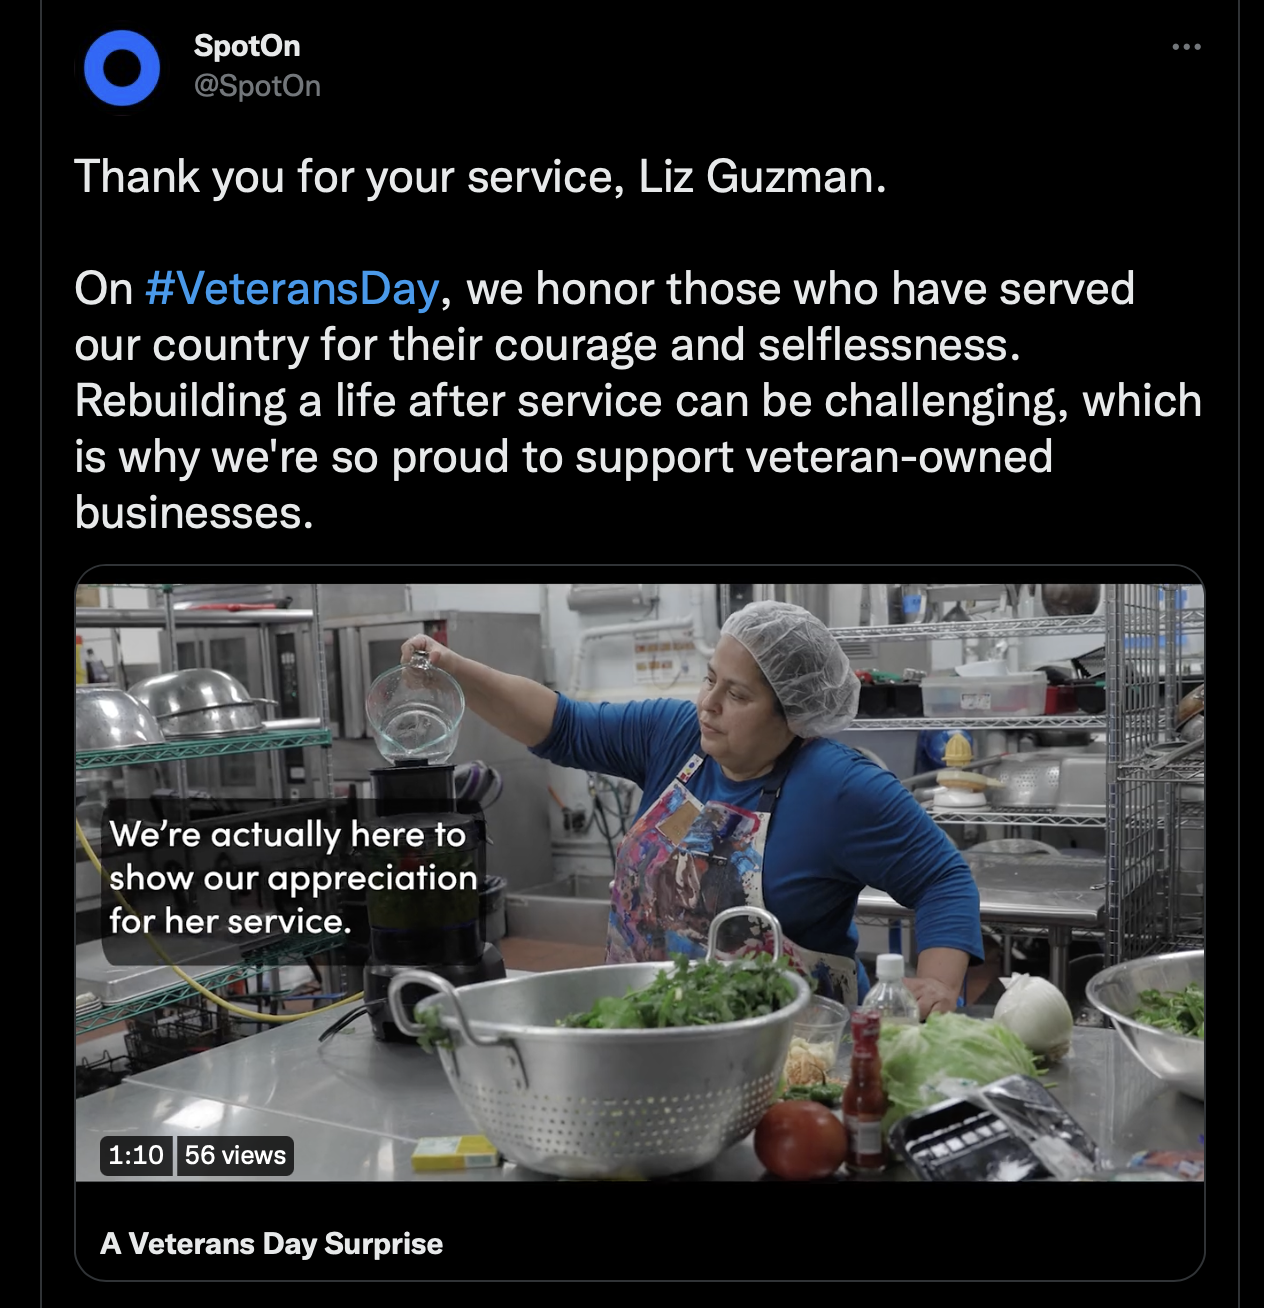 Screenshot of a Twitter Post with text surrounding Veterans Day, and an image of a chef preparing a meal in a kitchen.